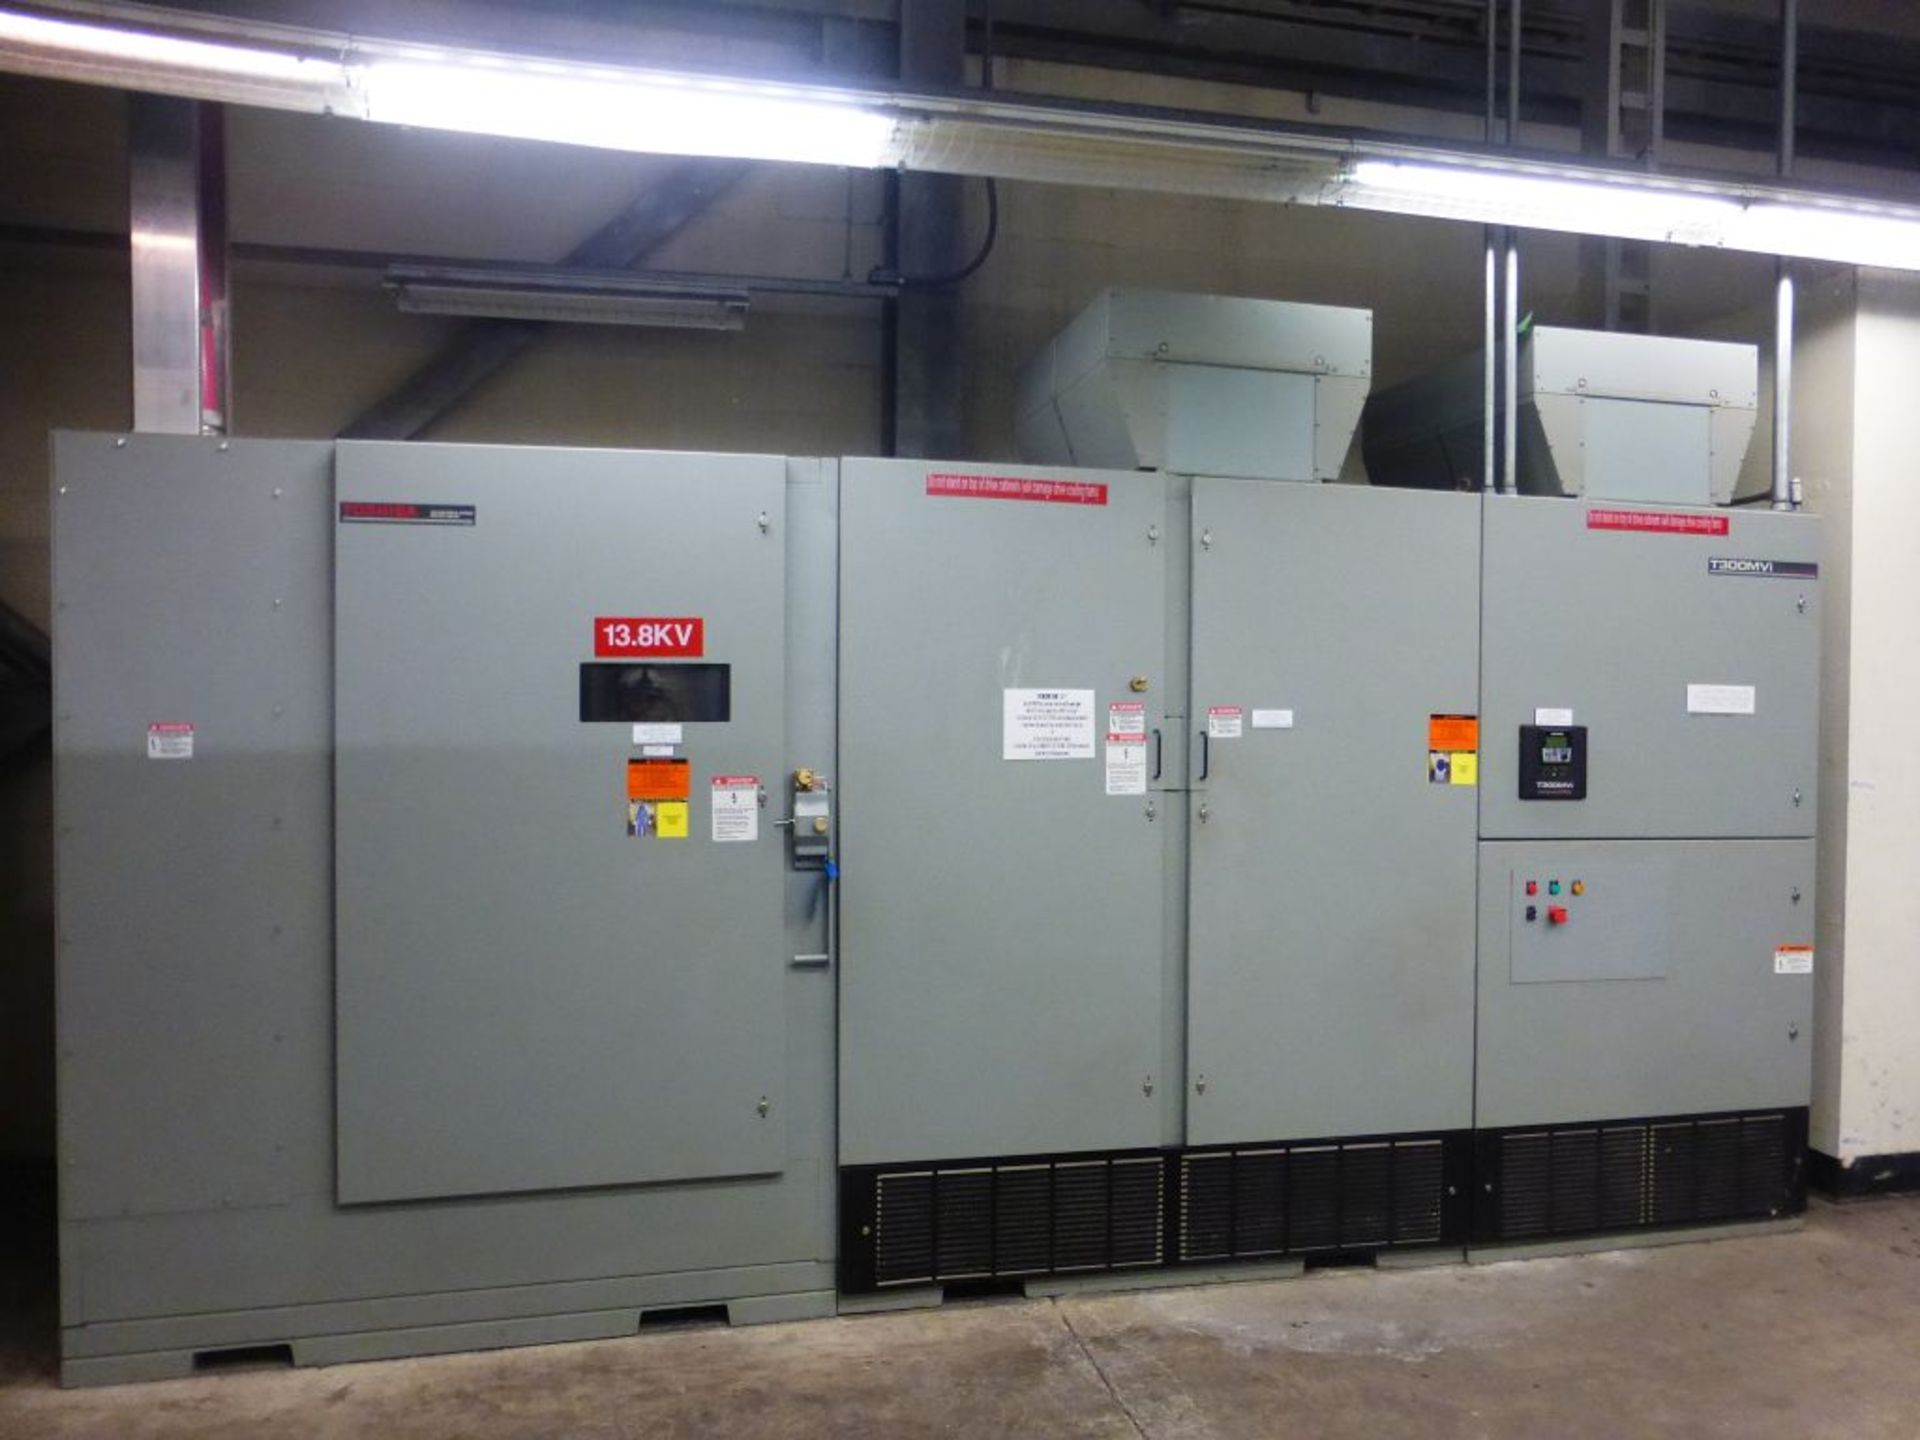 2006 Toshiba Medium Voltage Adjustable Speed Motor Drive - Removed from Service January 2022 |